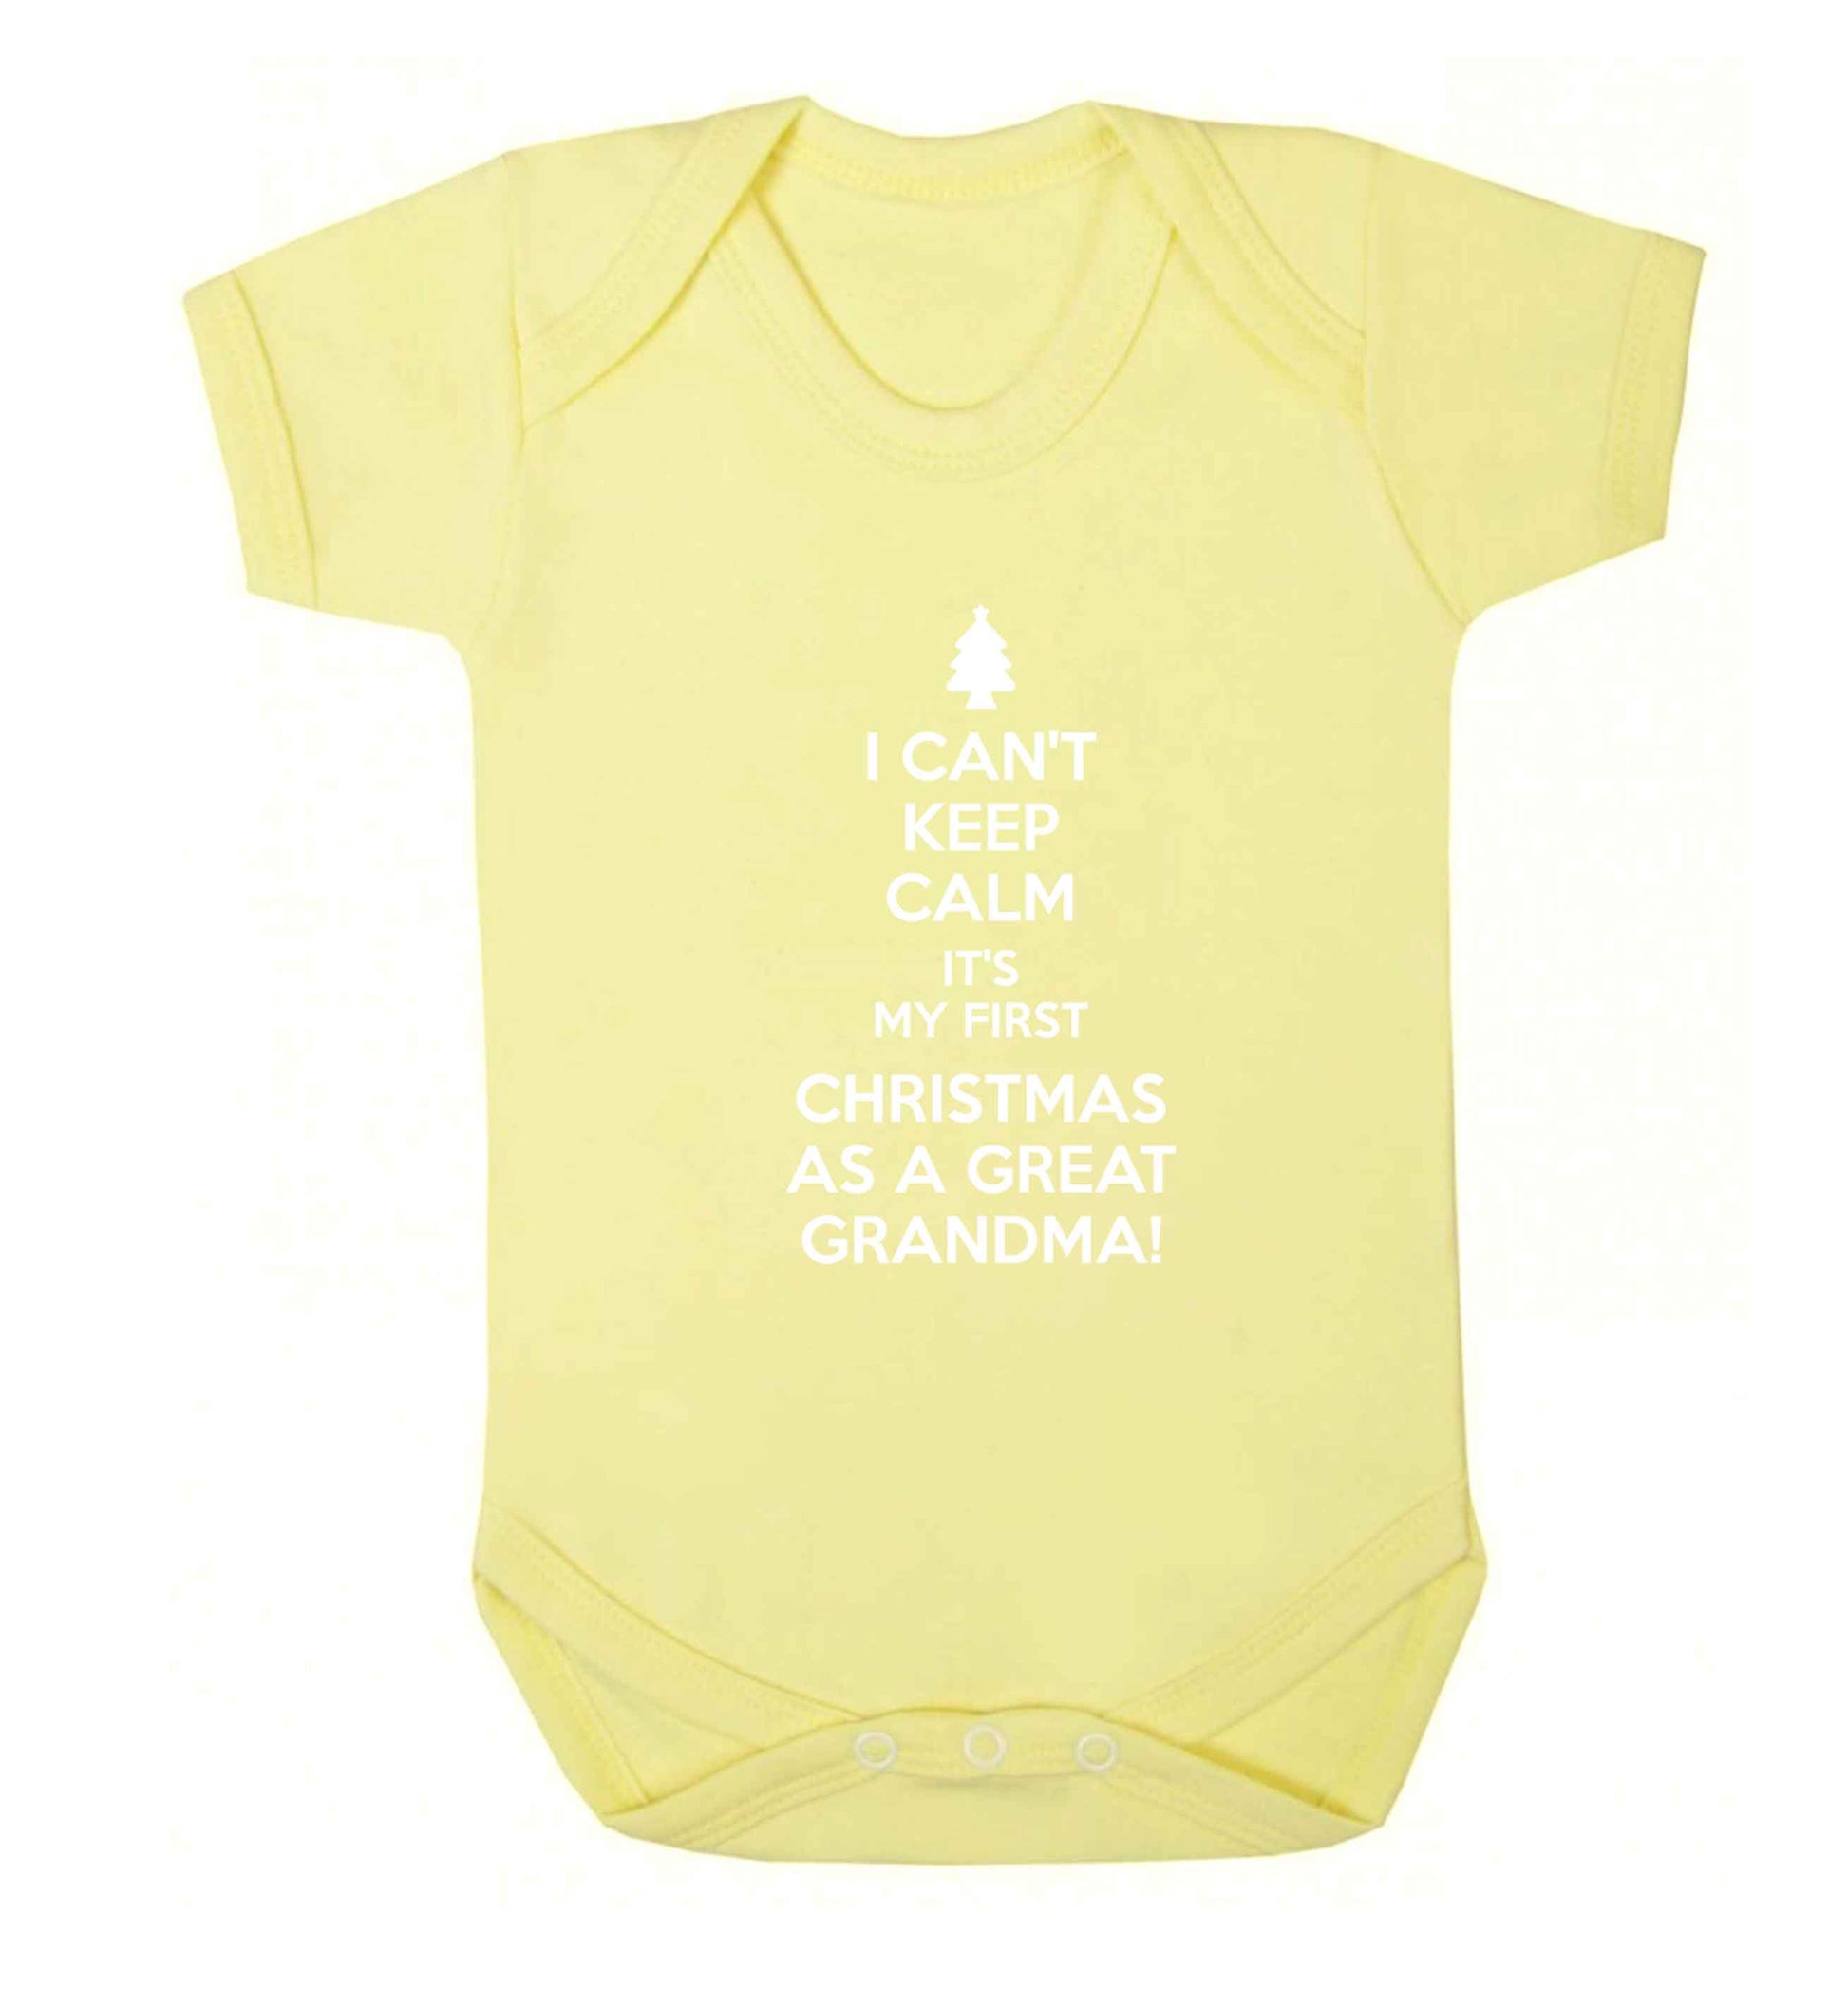 I can't keep calm it's my first Christmas as a great grandma! Baby Vest pale yellow 18-24 months